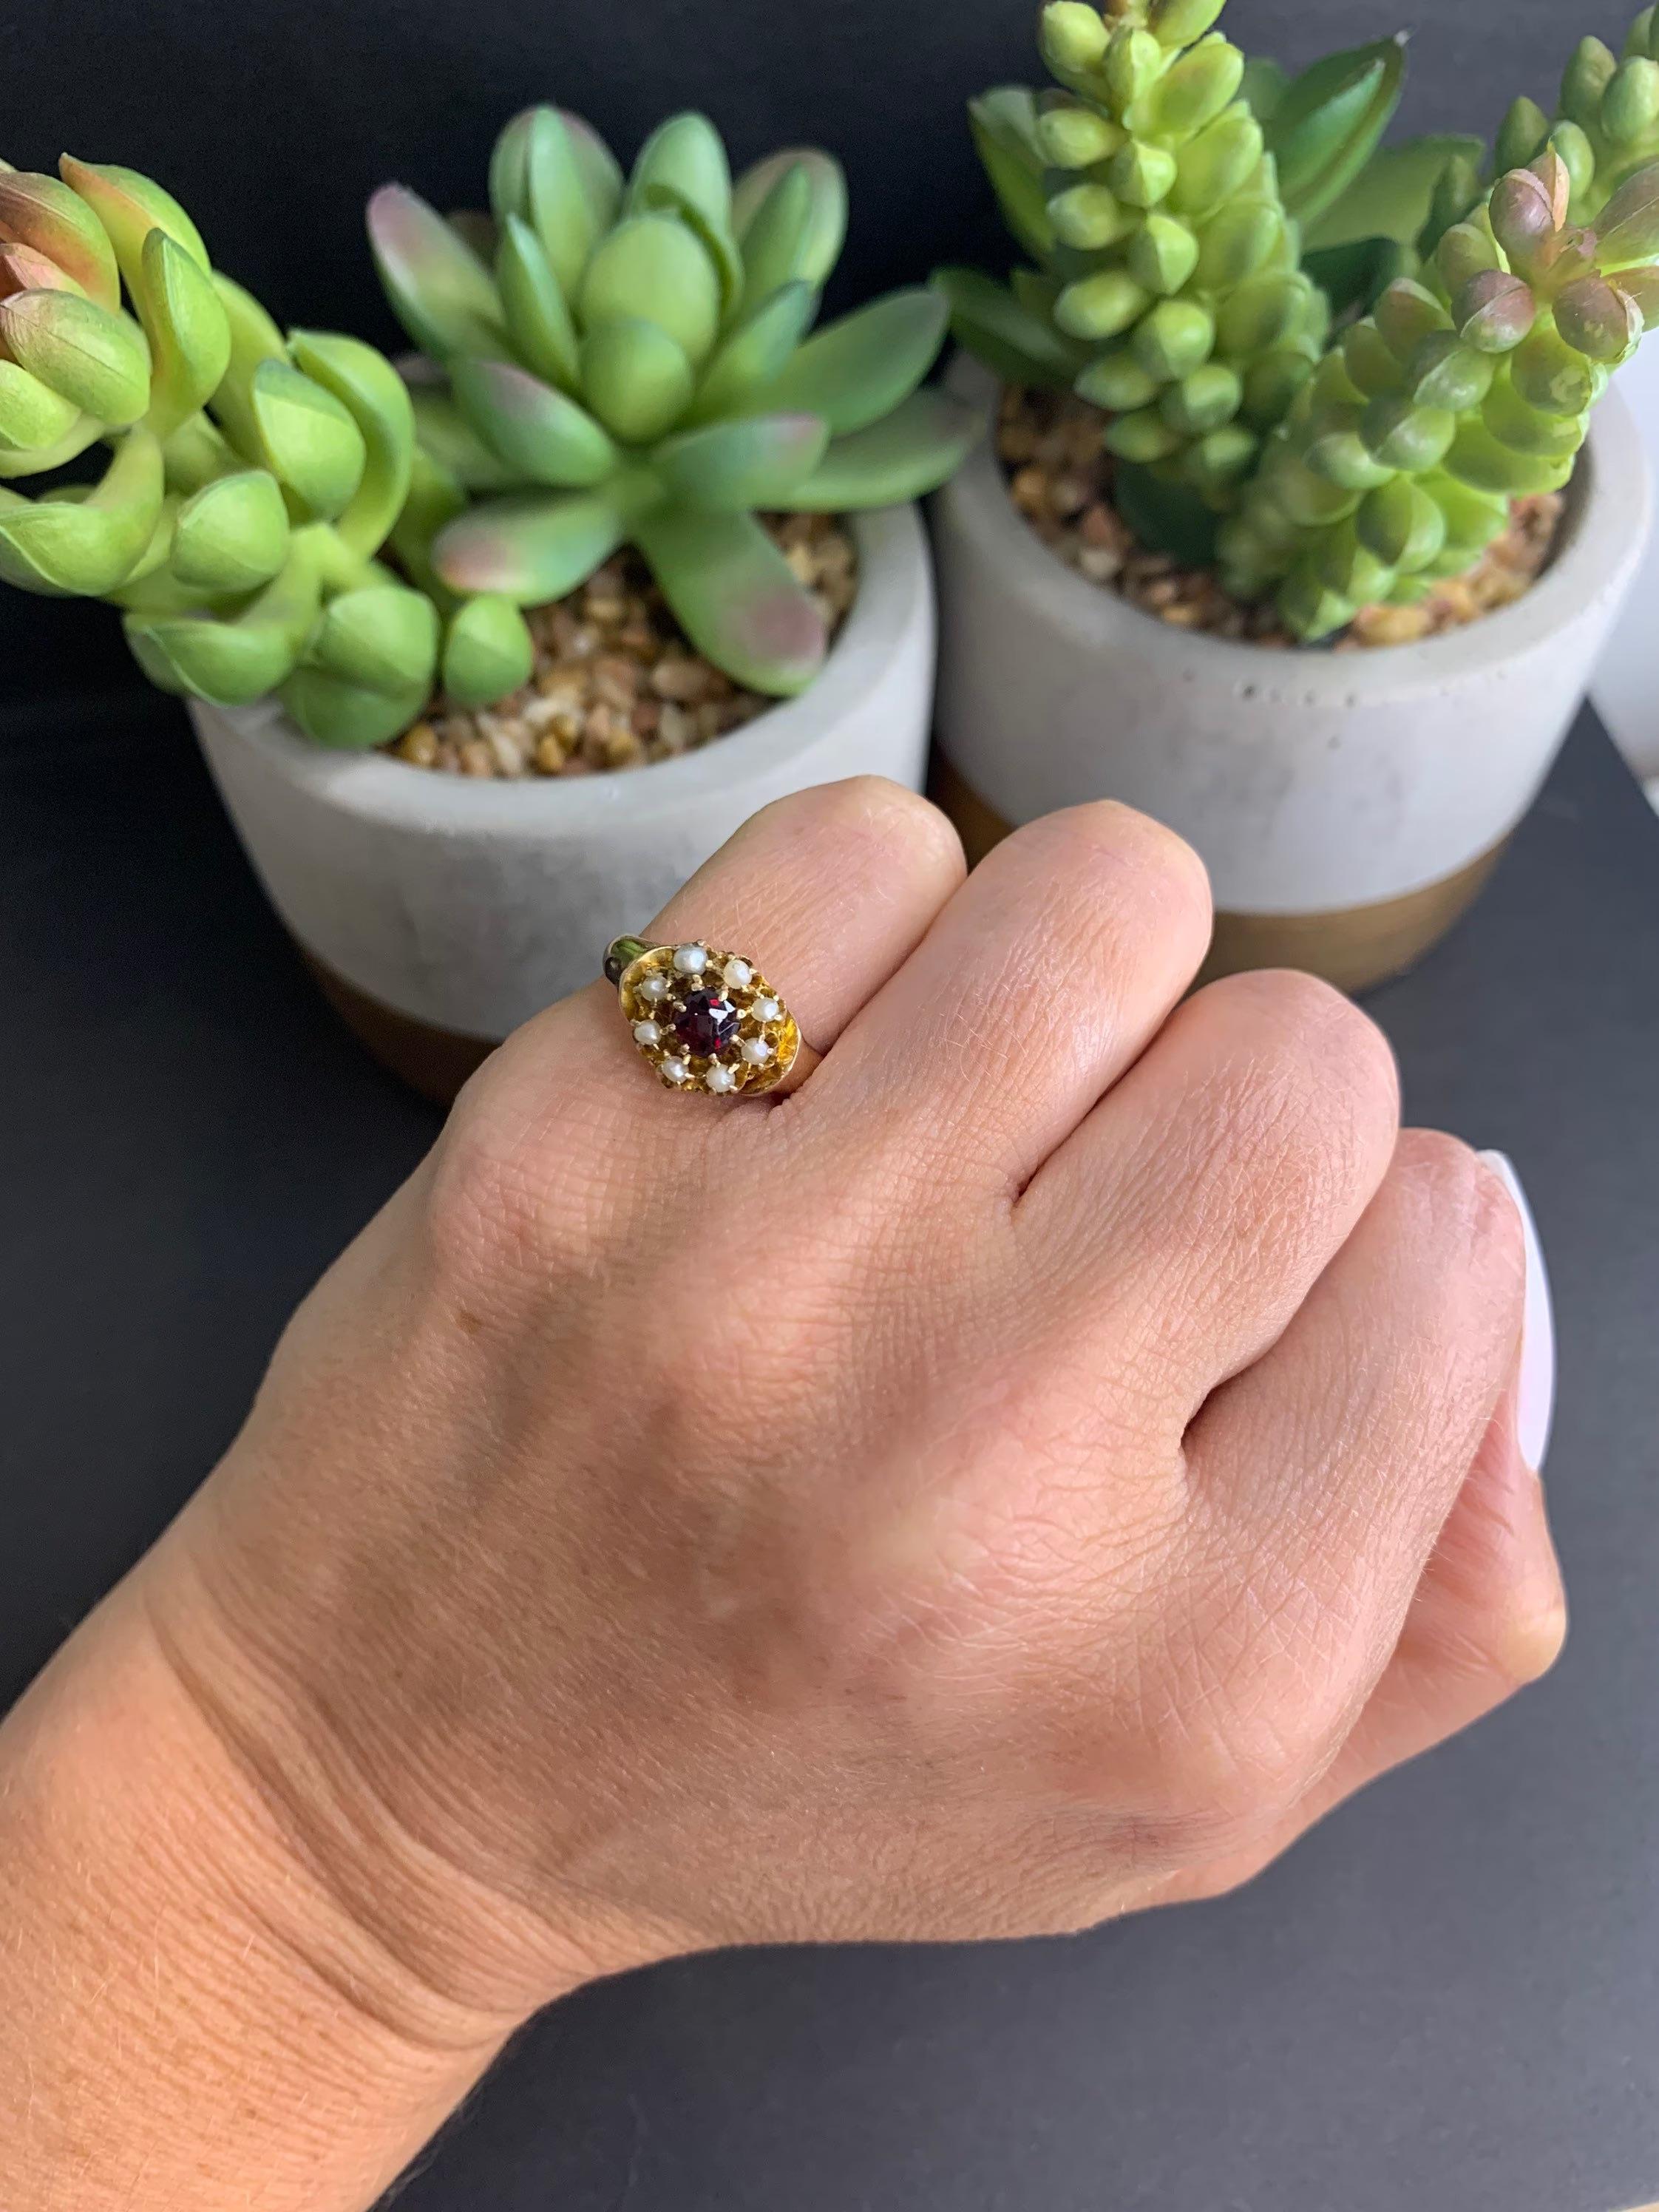 Cabochon Garnet & Seed Pearl Daisy Ring 

9ct Gold 

Circa 1920’s

Gorgeous Daisy Style Ring with A Cabochon Garnet Centre & Seed Pearl Petals

Makes a Fabulous Pinky Ring 

UK Size J

US Size 5

Can be resized using our resizing service,
please